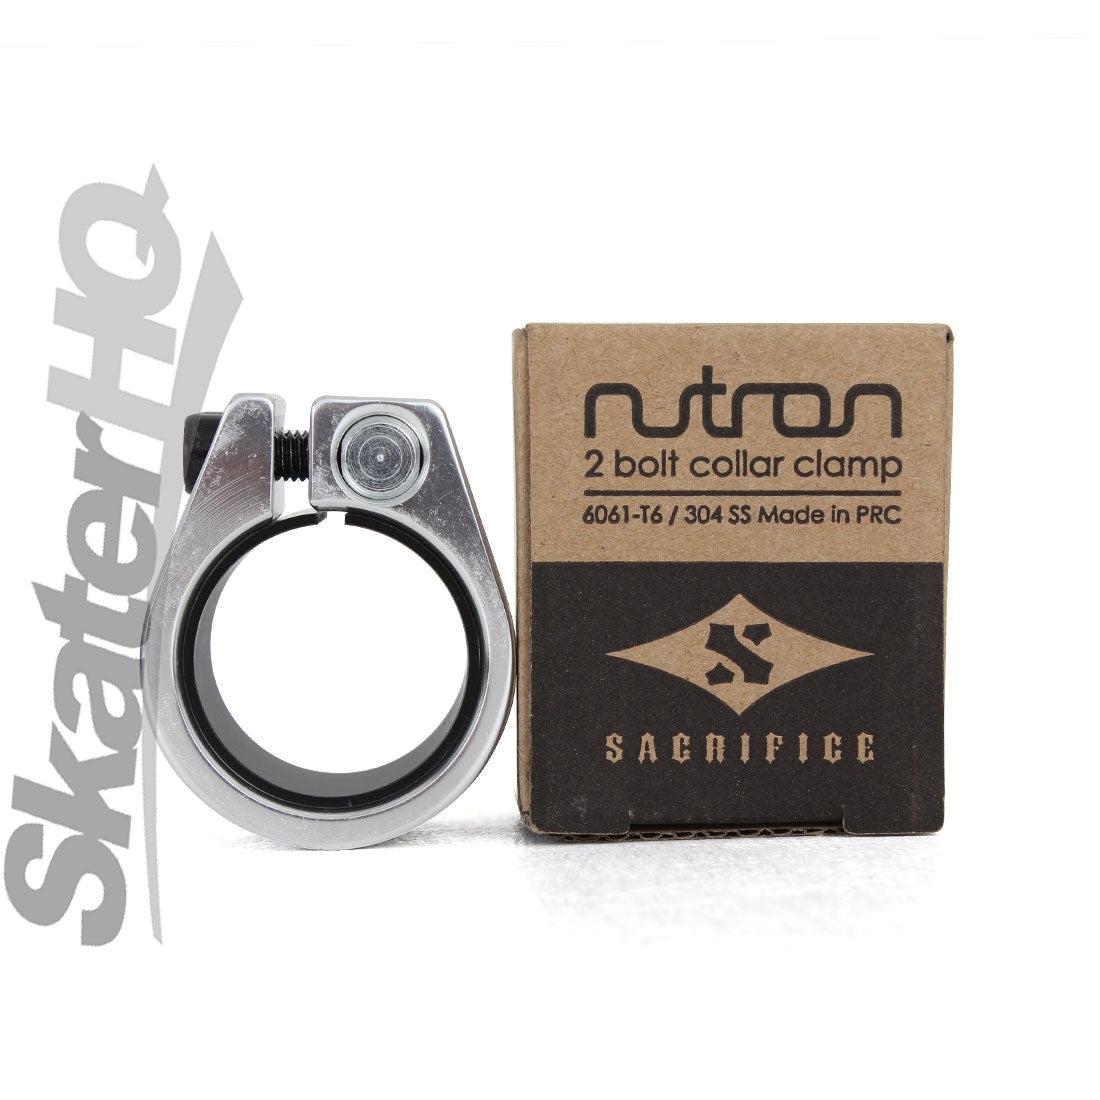 Sacrifice Nutron Collar Clamp - Polished Scooter Headsets and Clamps